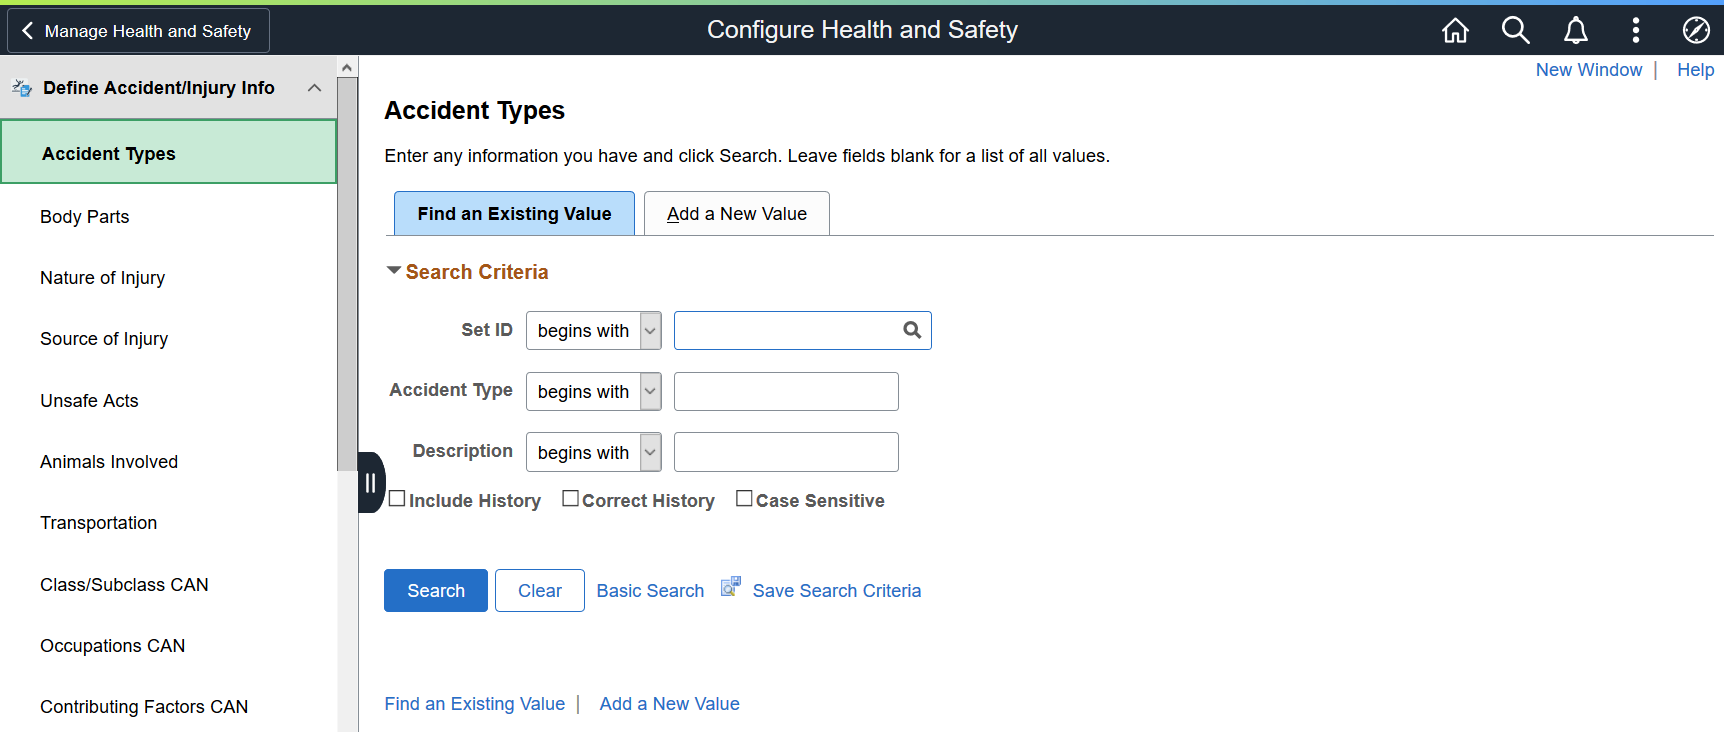 Configure Health and Safety application start page